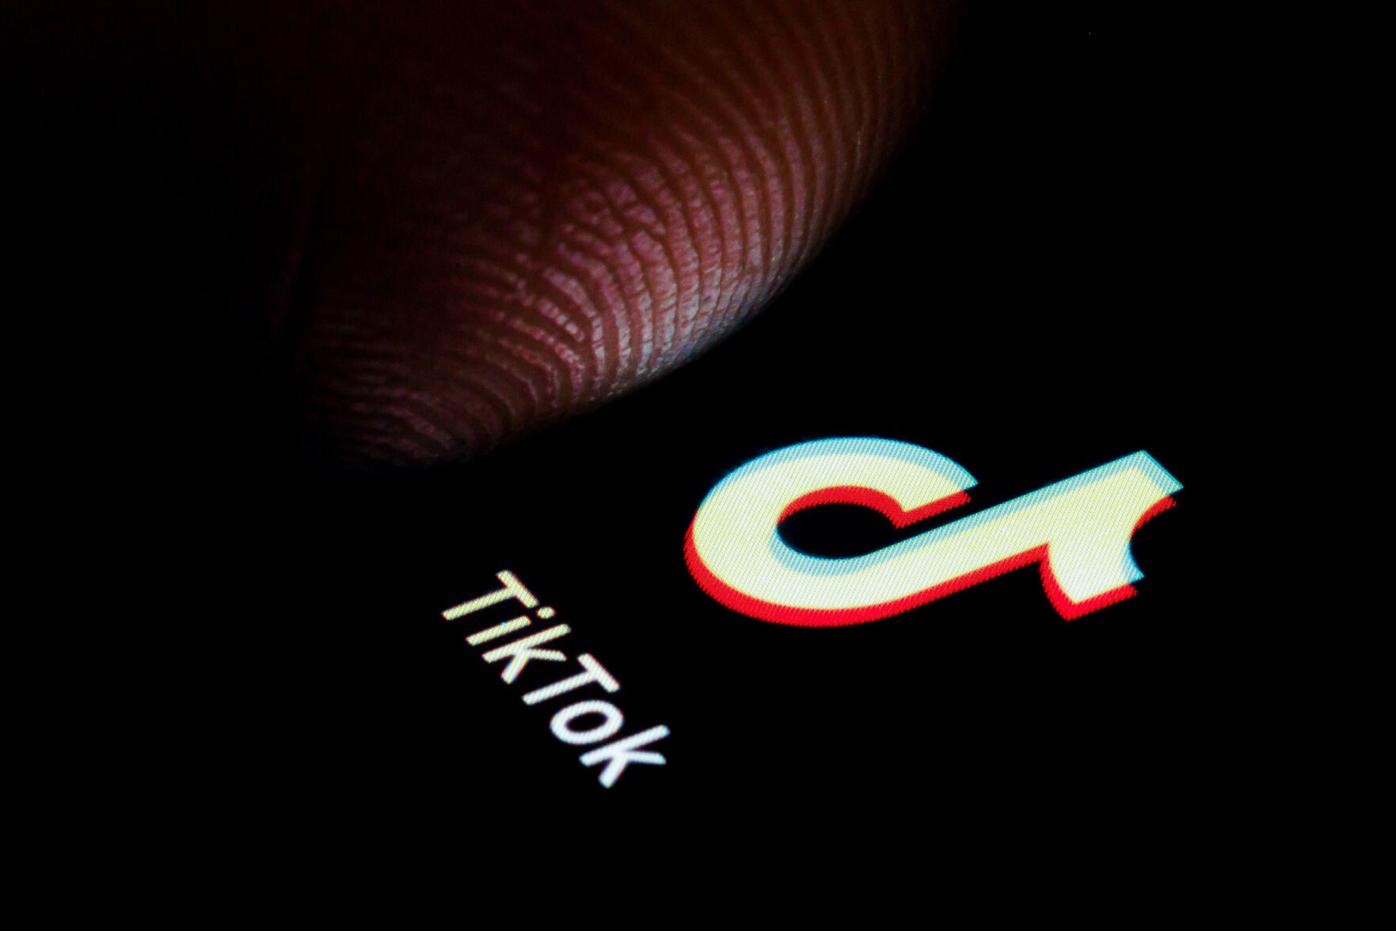 Australia bans TikTok on government devices over security concerns